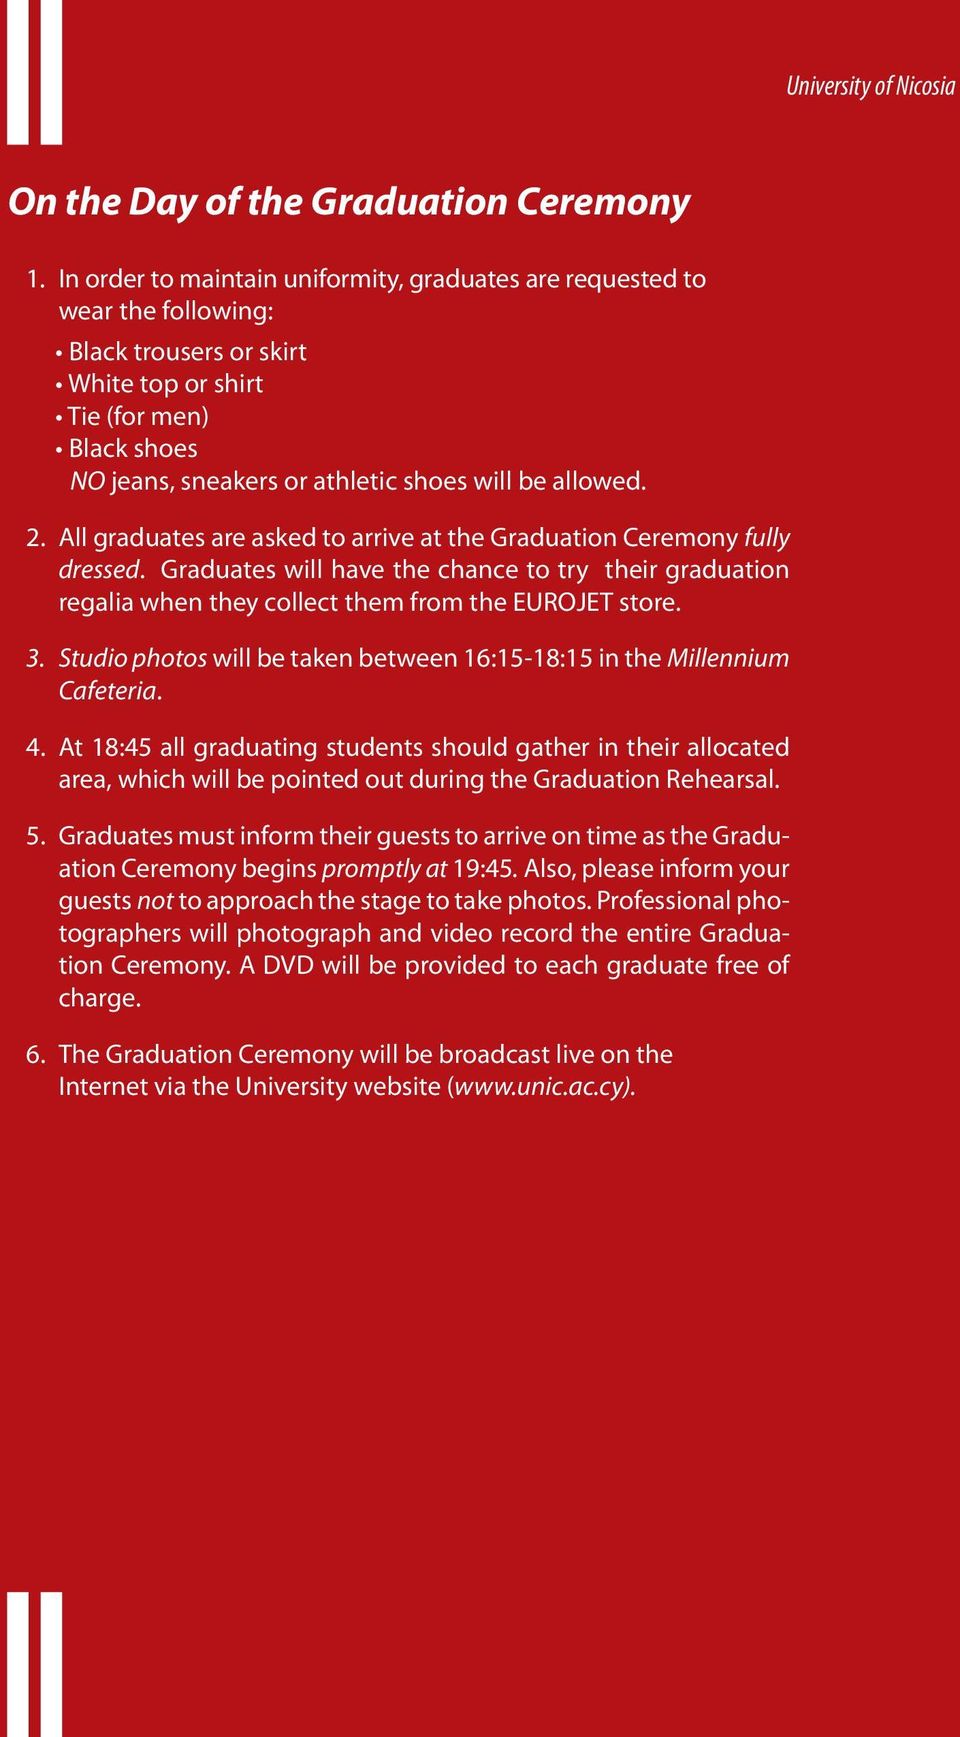 allowed. 2. All graduates are asked to arrive at the Graduation Ceremony fully dressed. Graduates will have the chance to try their graduation regalia when they collect them from the EUROJET store. 3.